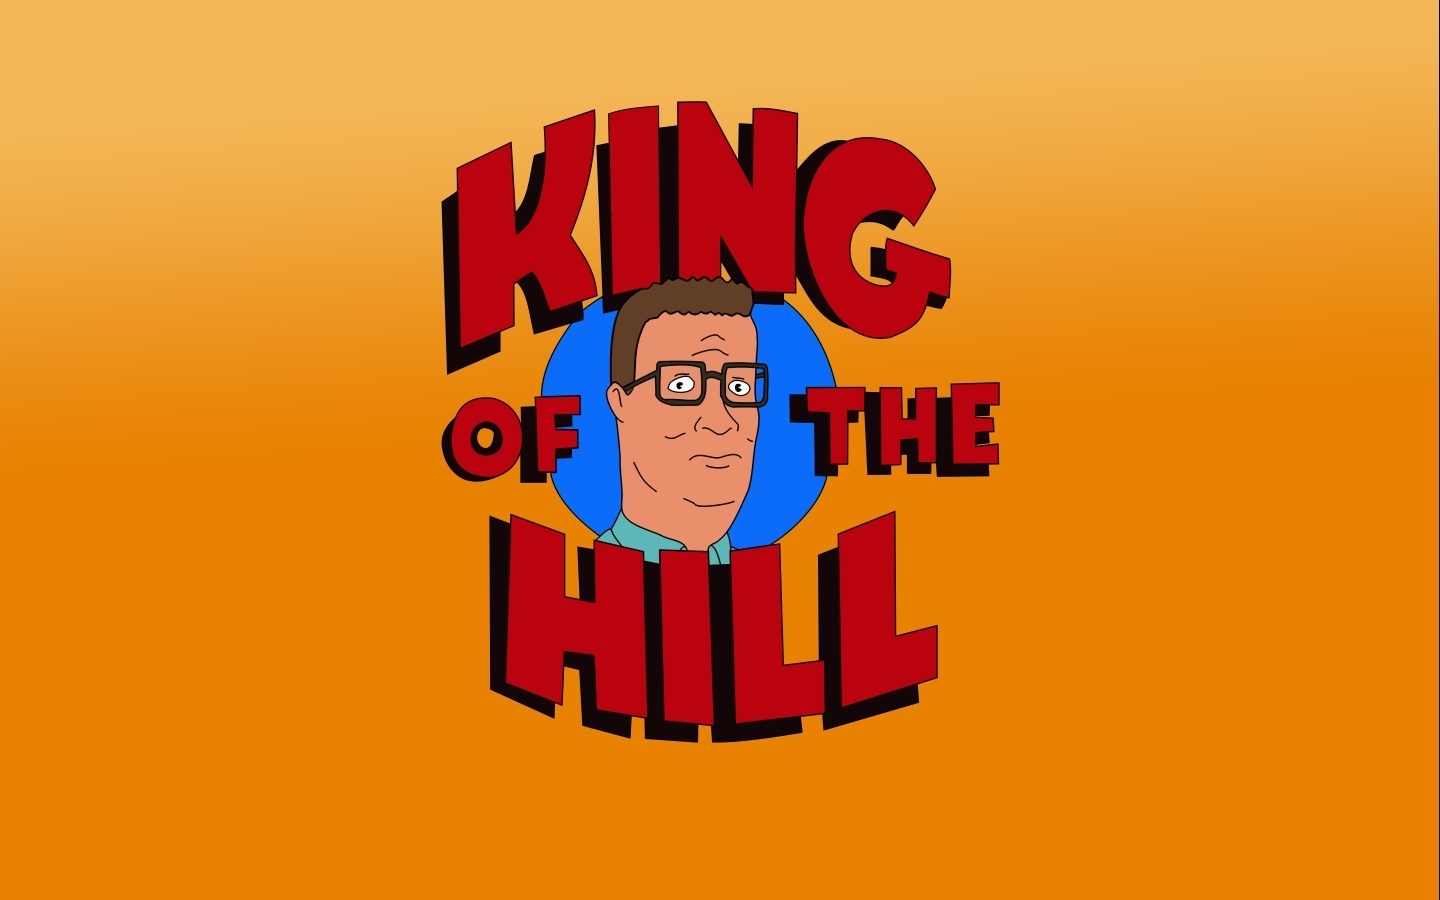 Wallpaper from Russian funs   King of the Hill Wallpaper 12529142 1440x900